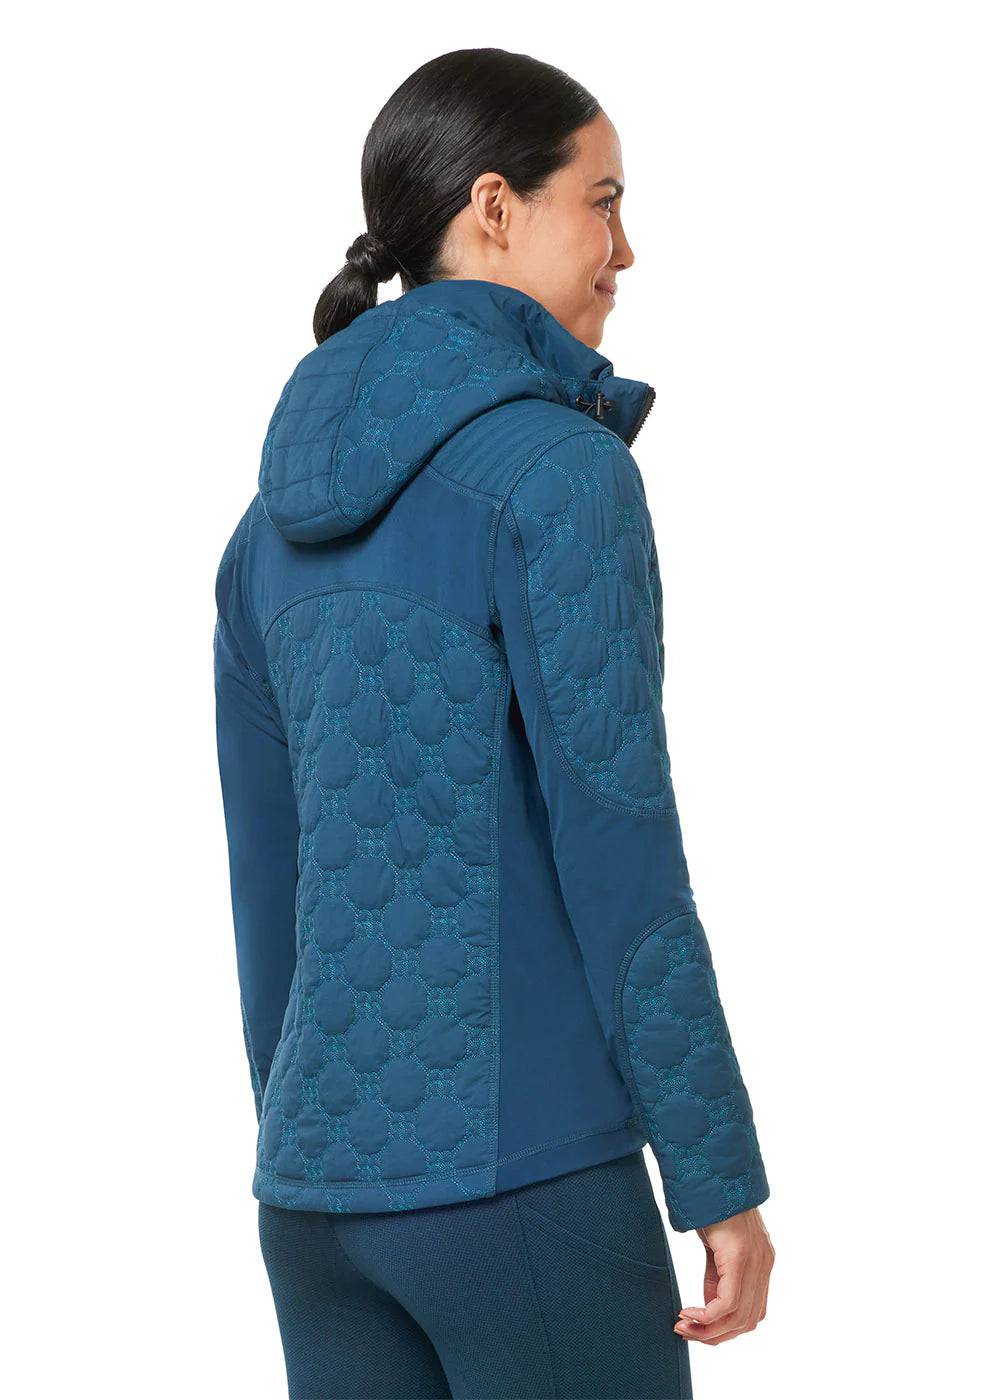 Kerrits Bit by Bit Quilted Riding Jacket